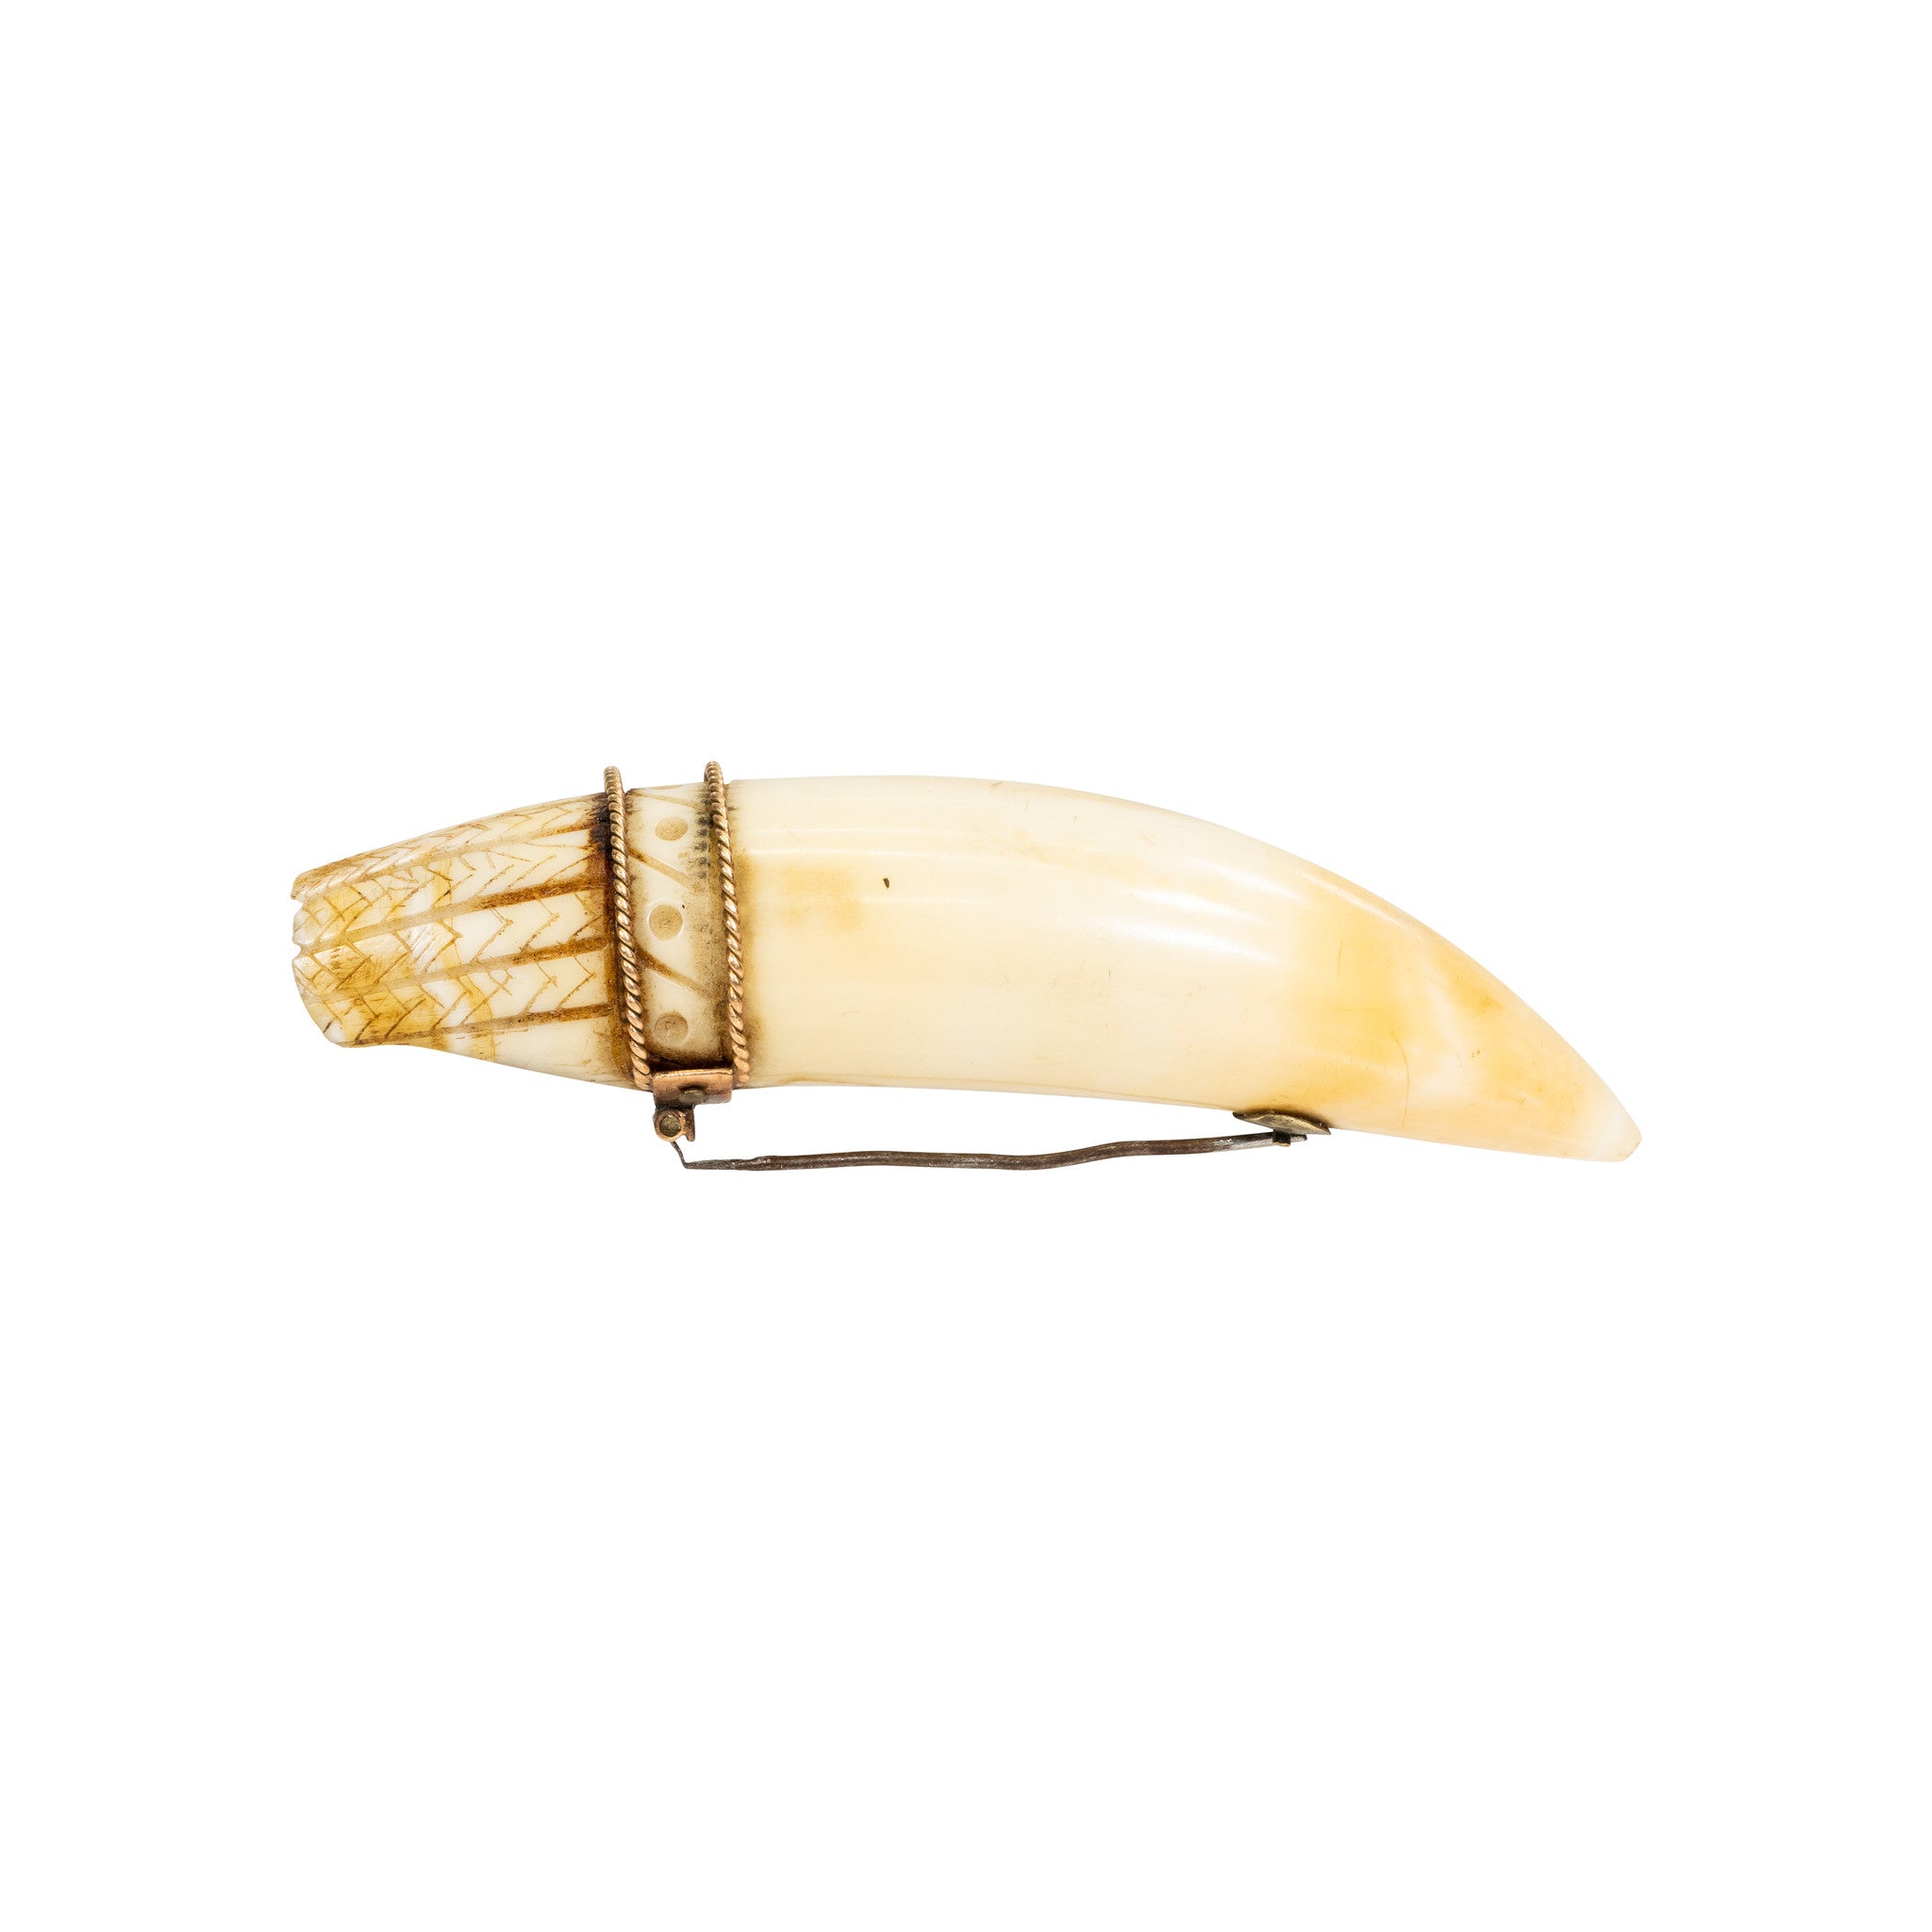 Sperm Whale Tooth Brooch